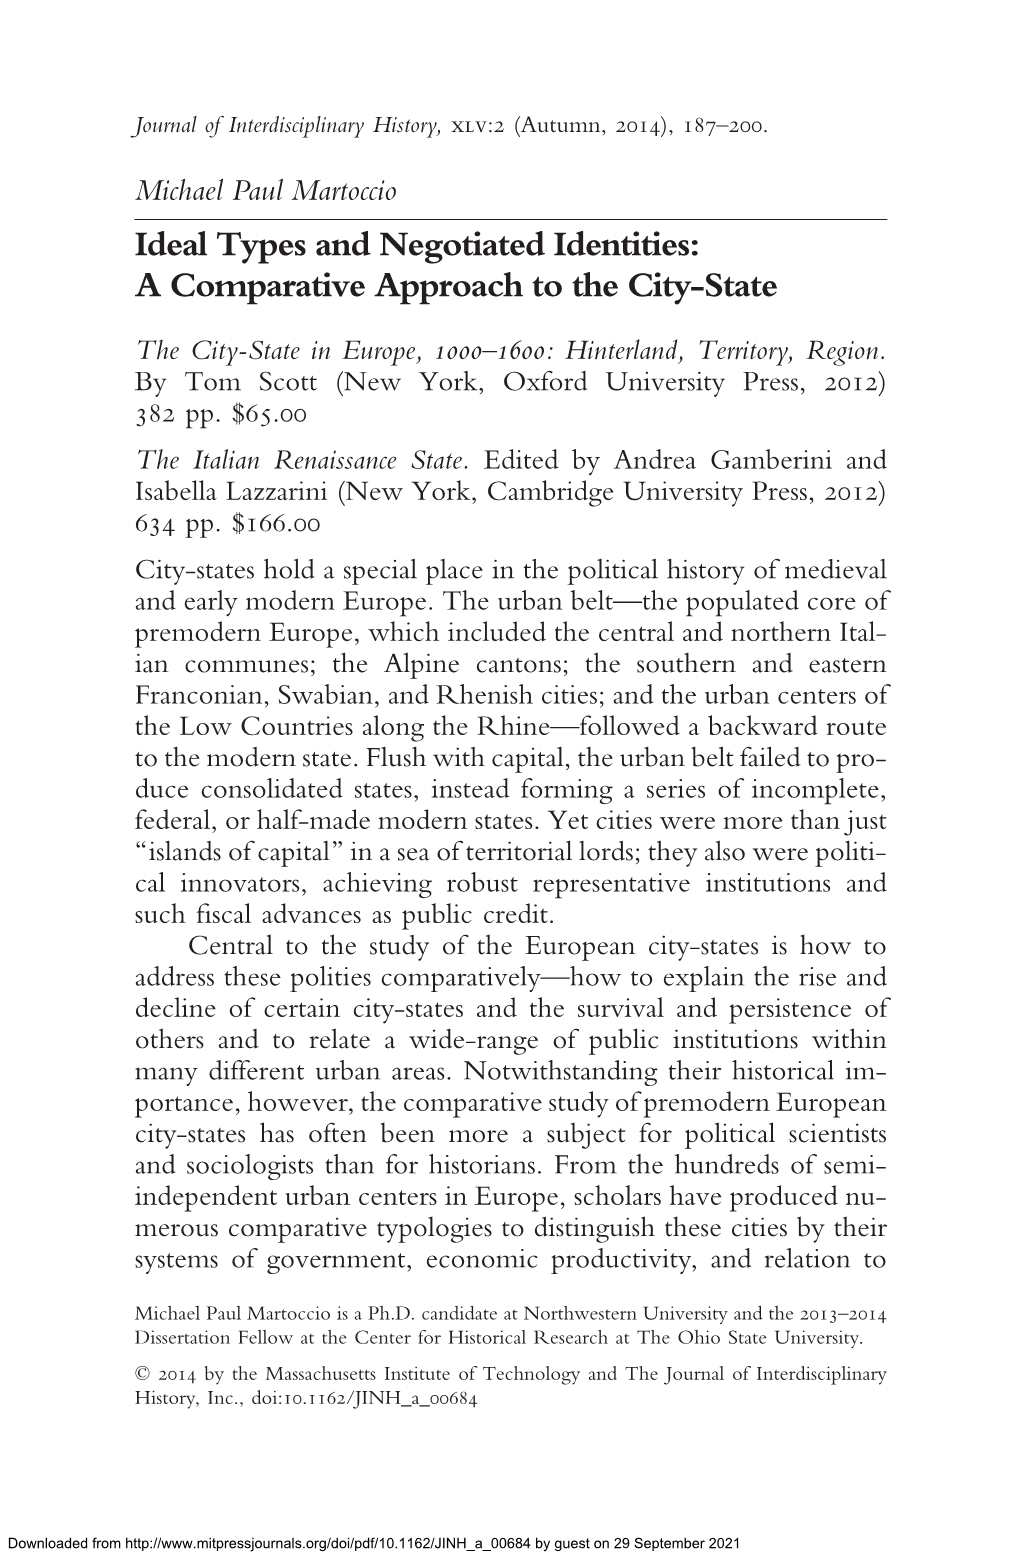 A COMPARATIVE APPROACH to the CITY-STATE Michael Paul Martoccio Ideal Types and Negotiated Identities: a Comparative Approach to the City-State